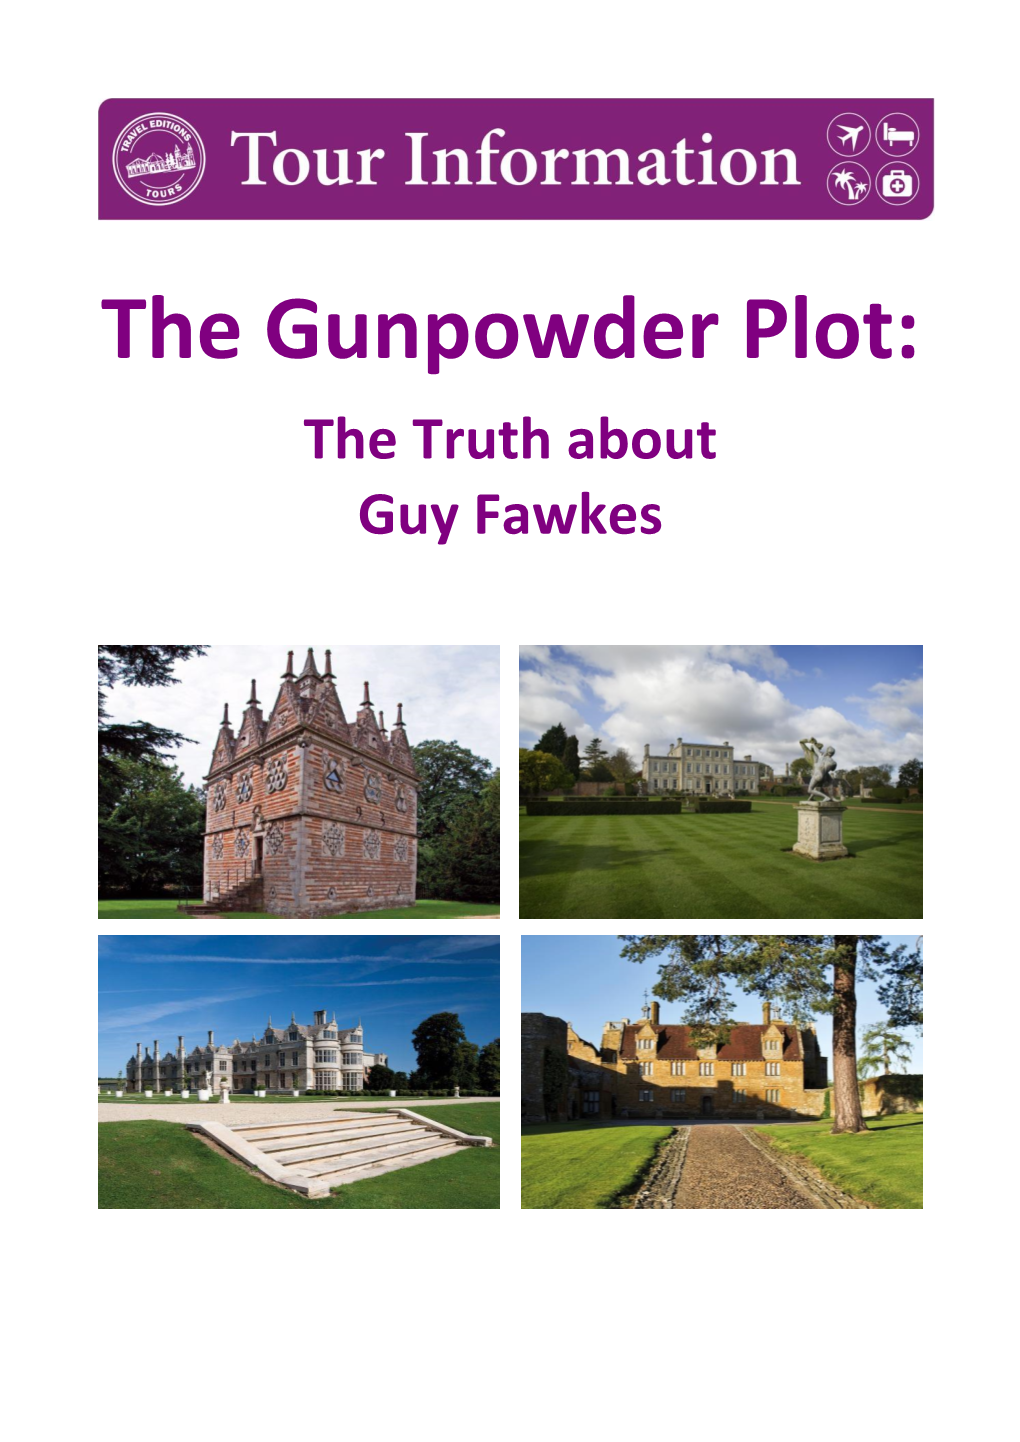 The Gunpowder Plot: the Truth About Guy Fawkes